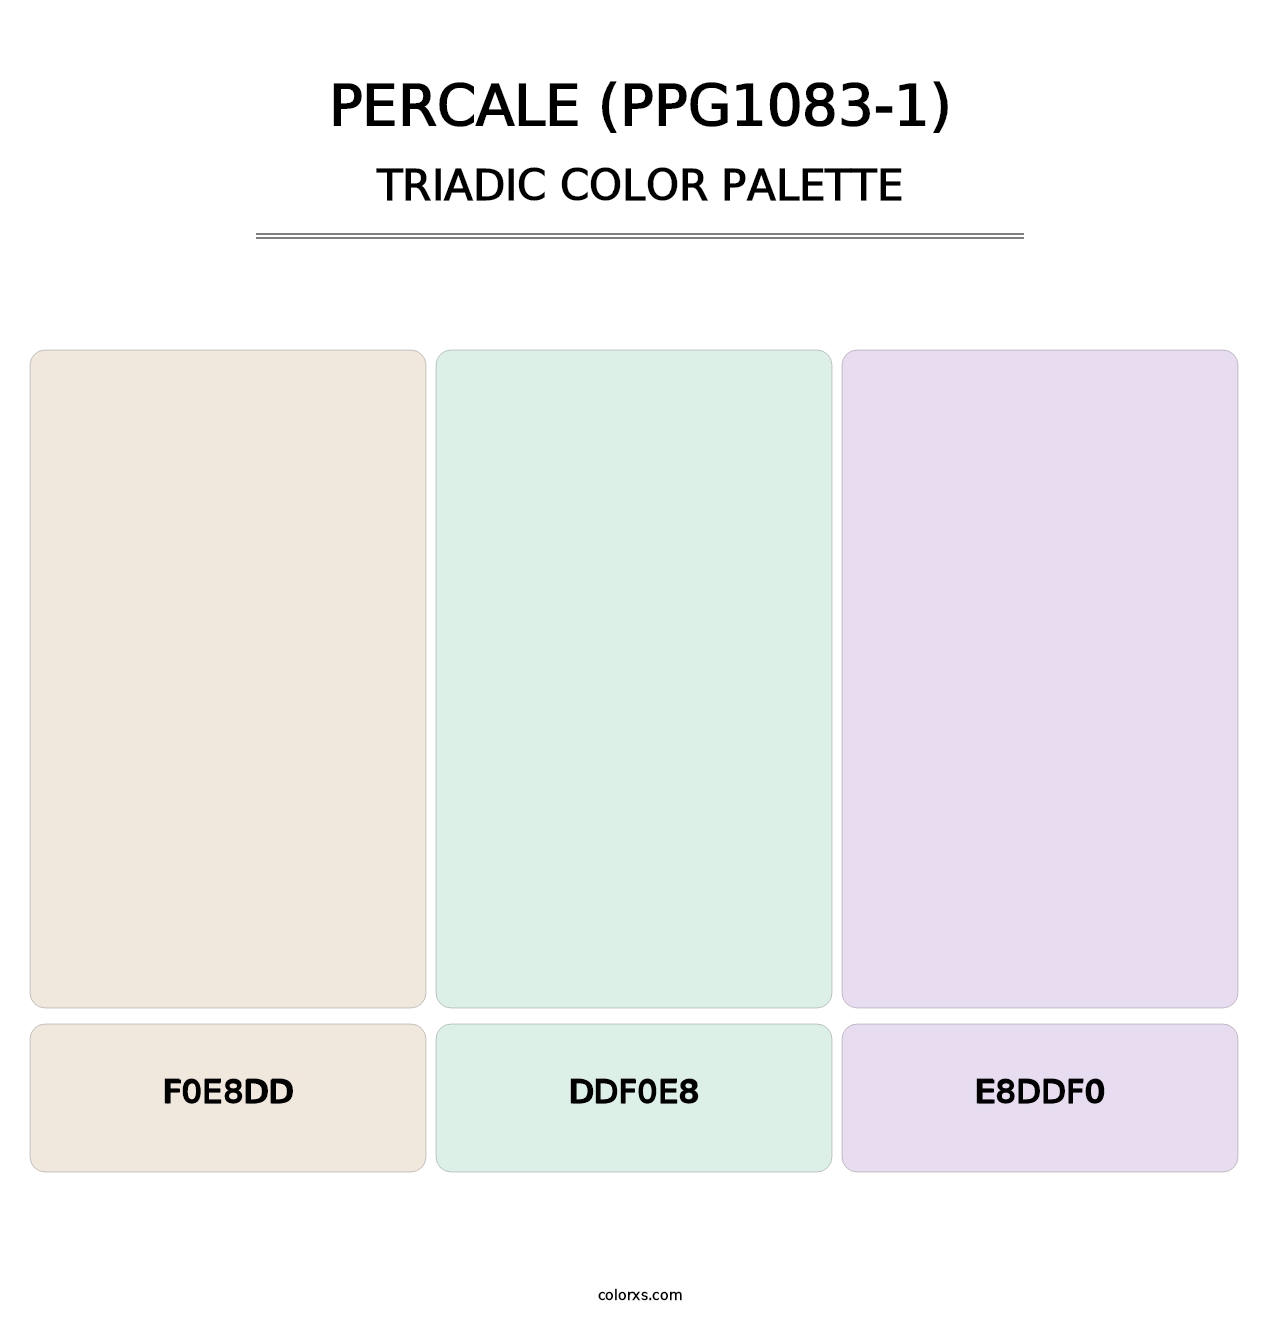 Percale (PPG1083-1) - Triadic Color Palette